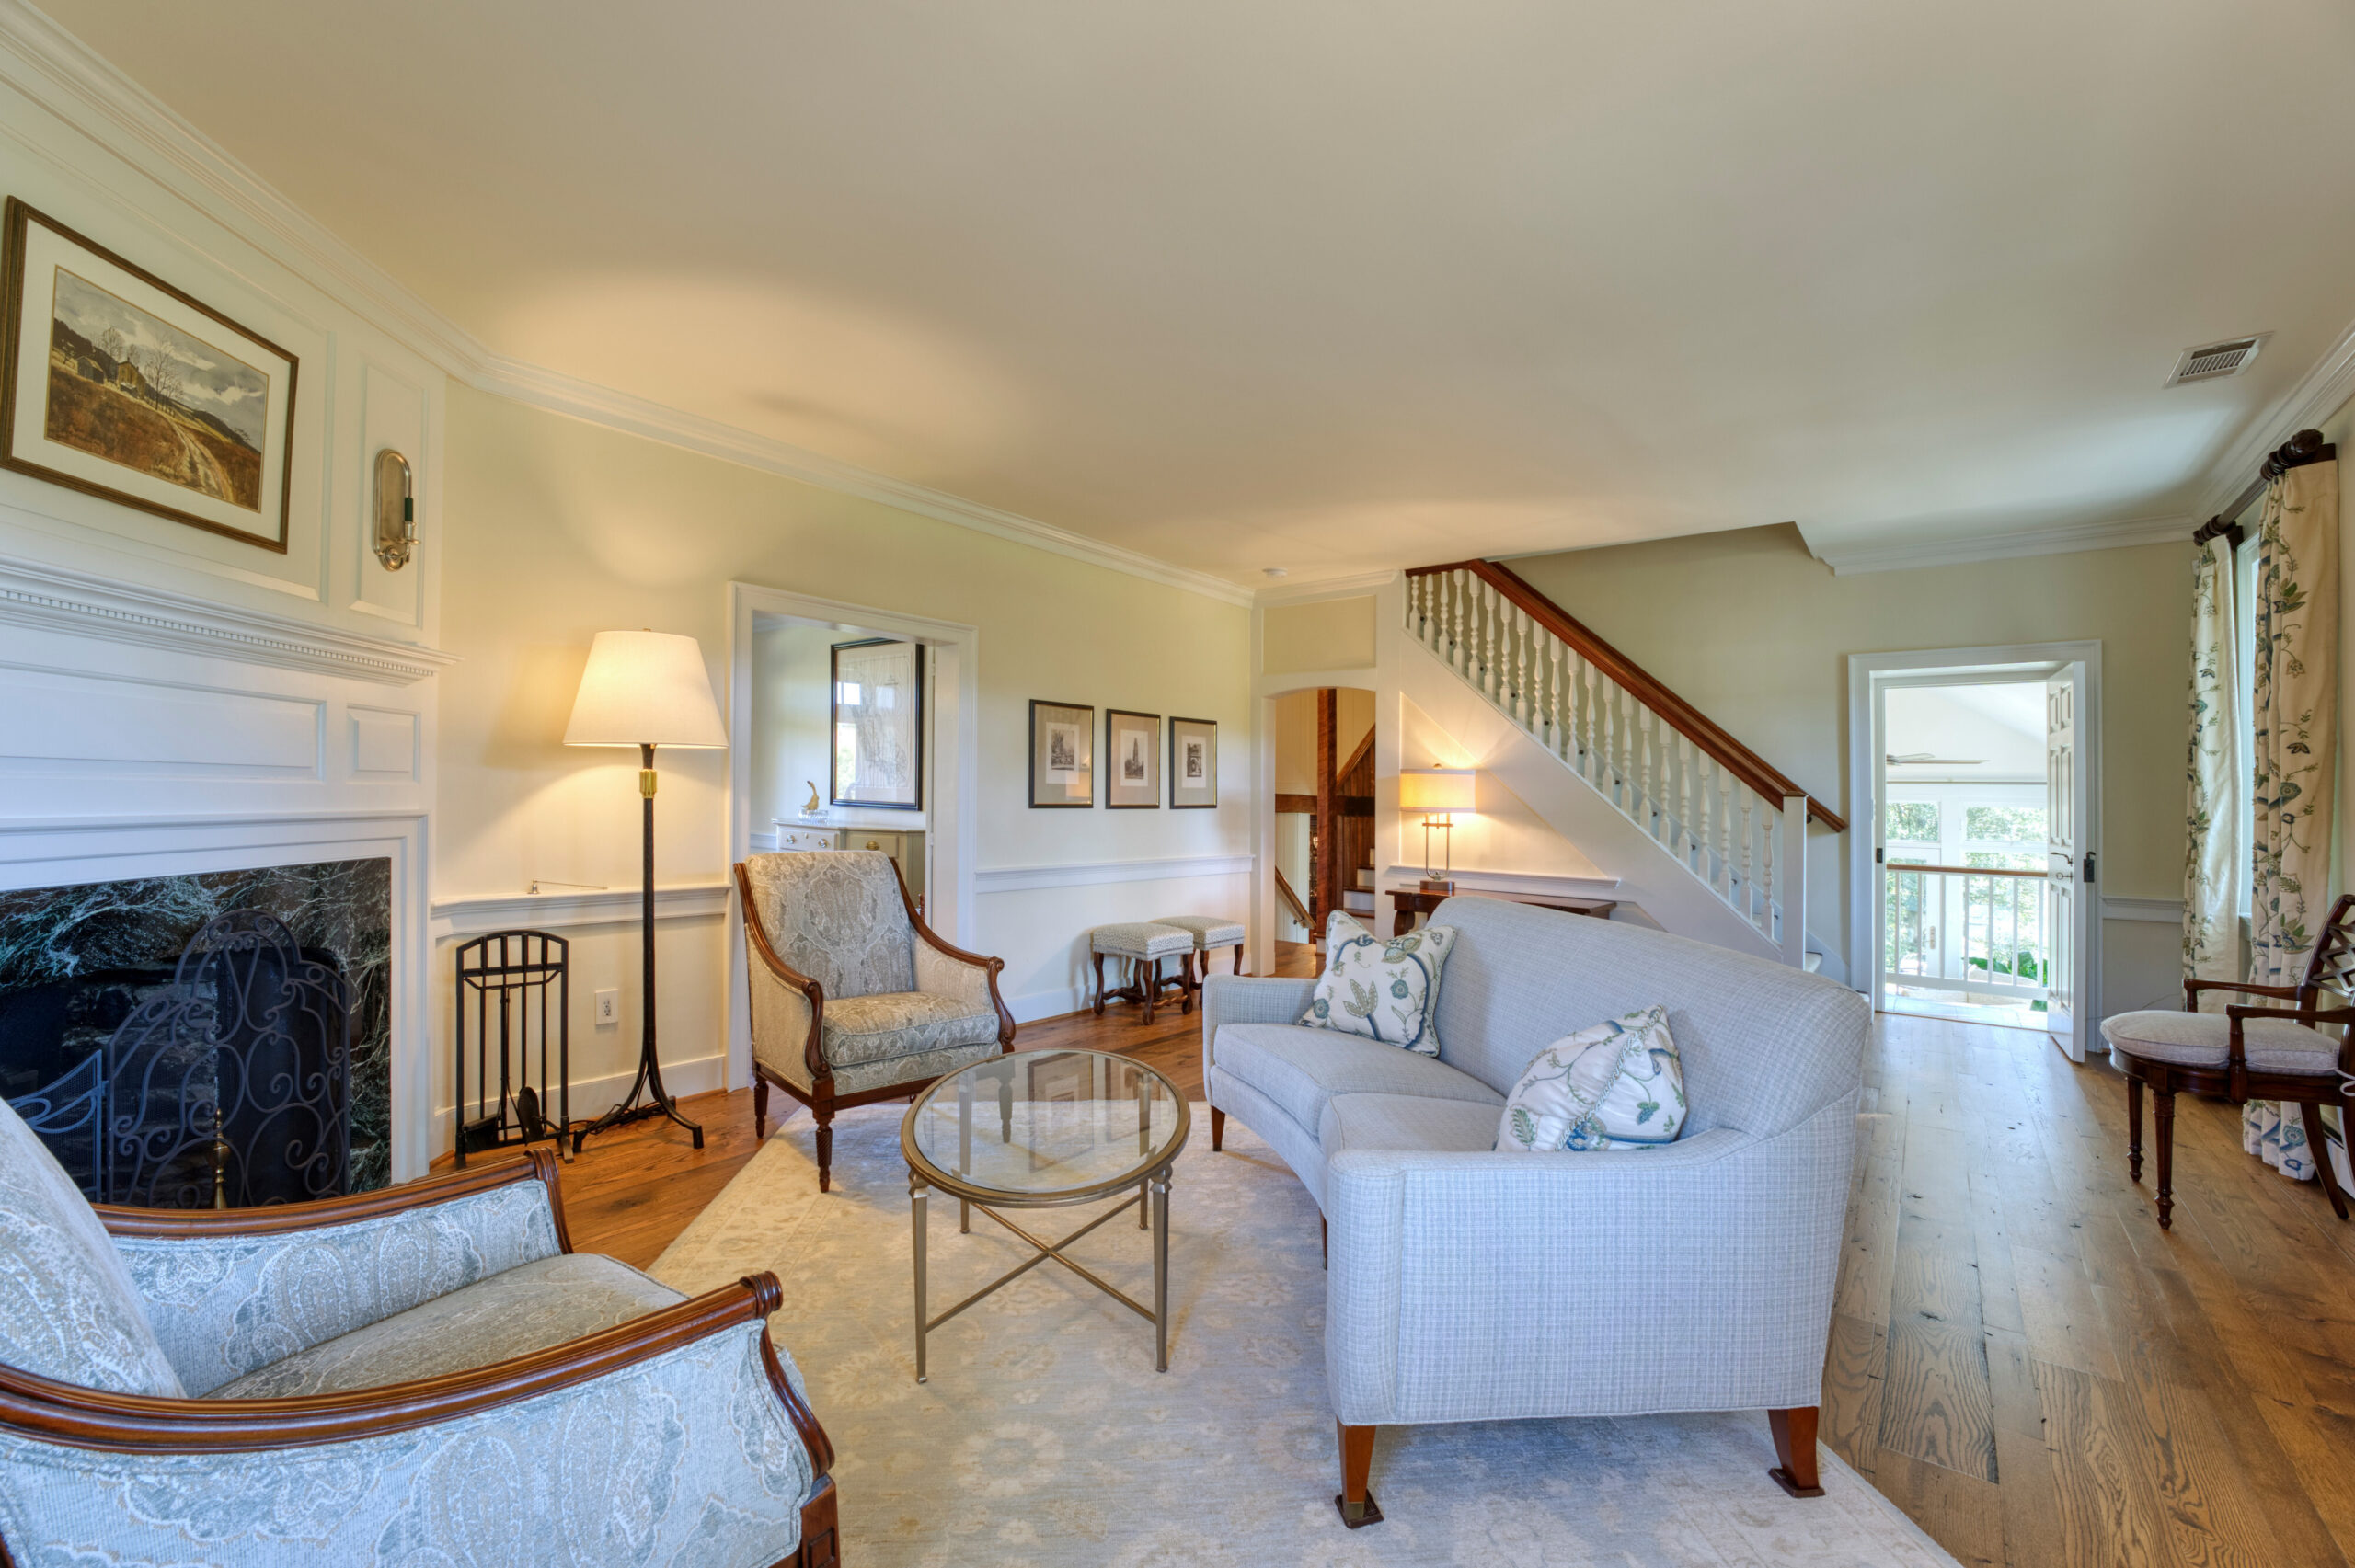 Professional interior photo of main house of Historic Hearthstone Manor: 35428 Appalachian Trail Rd, Round Hill, Virginia - showing formal living room with fireplace and staircases in the background